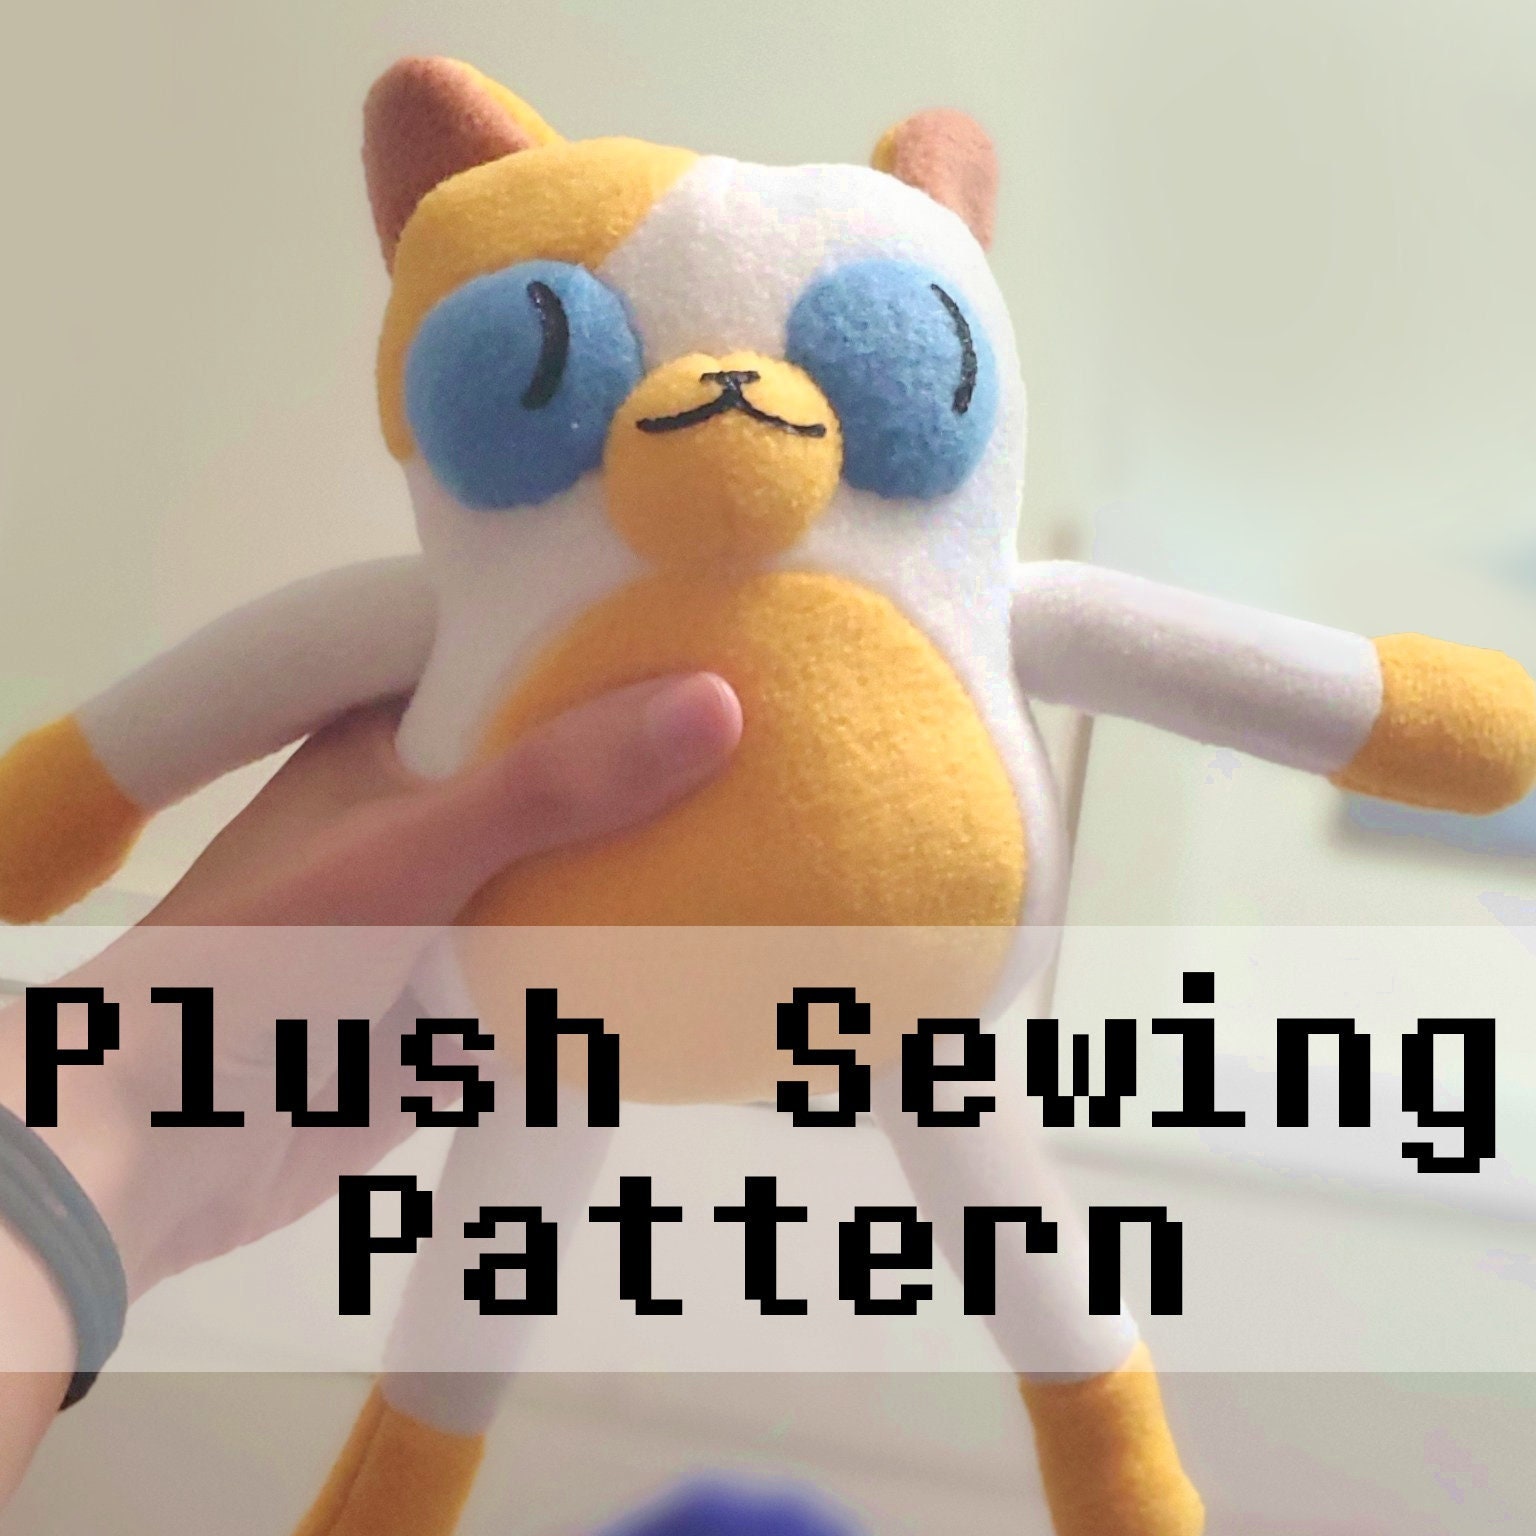 TBH Creature Plush PDF Sewing Pattern yippie Yippee Autism Beast